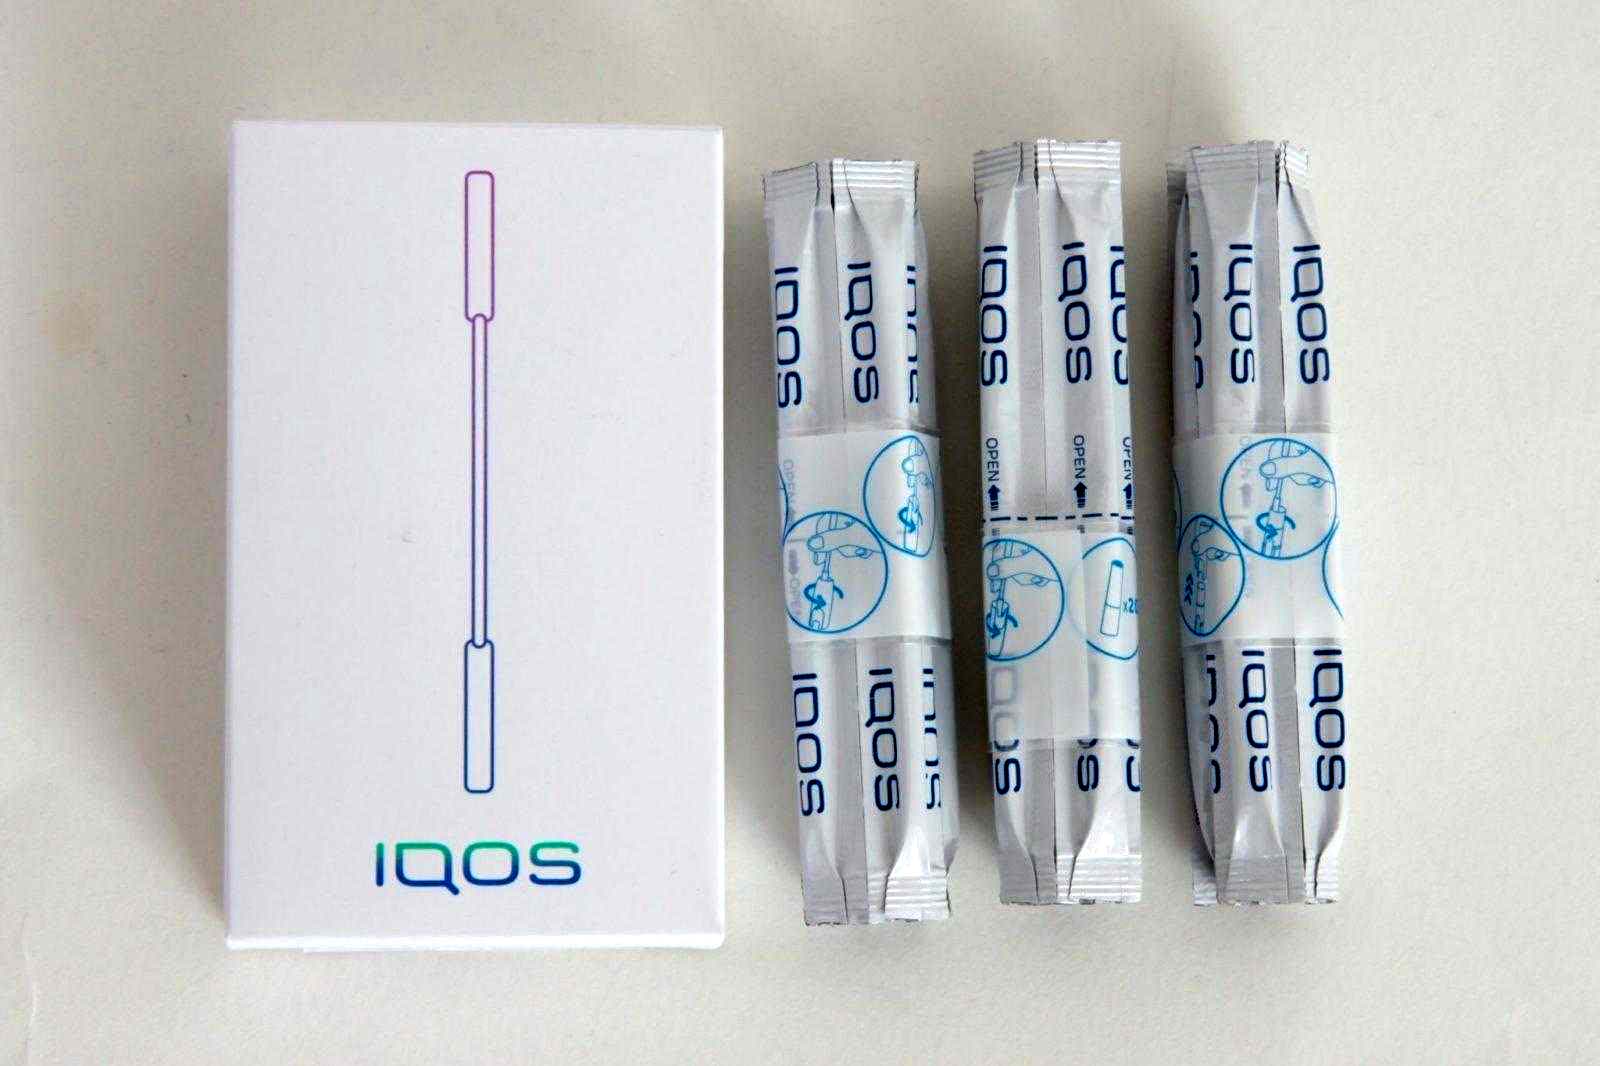  Hest Cleaning Sticks for IQOS, Cleaning Swabs for